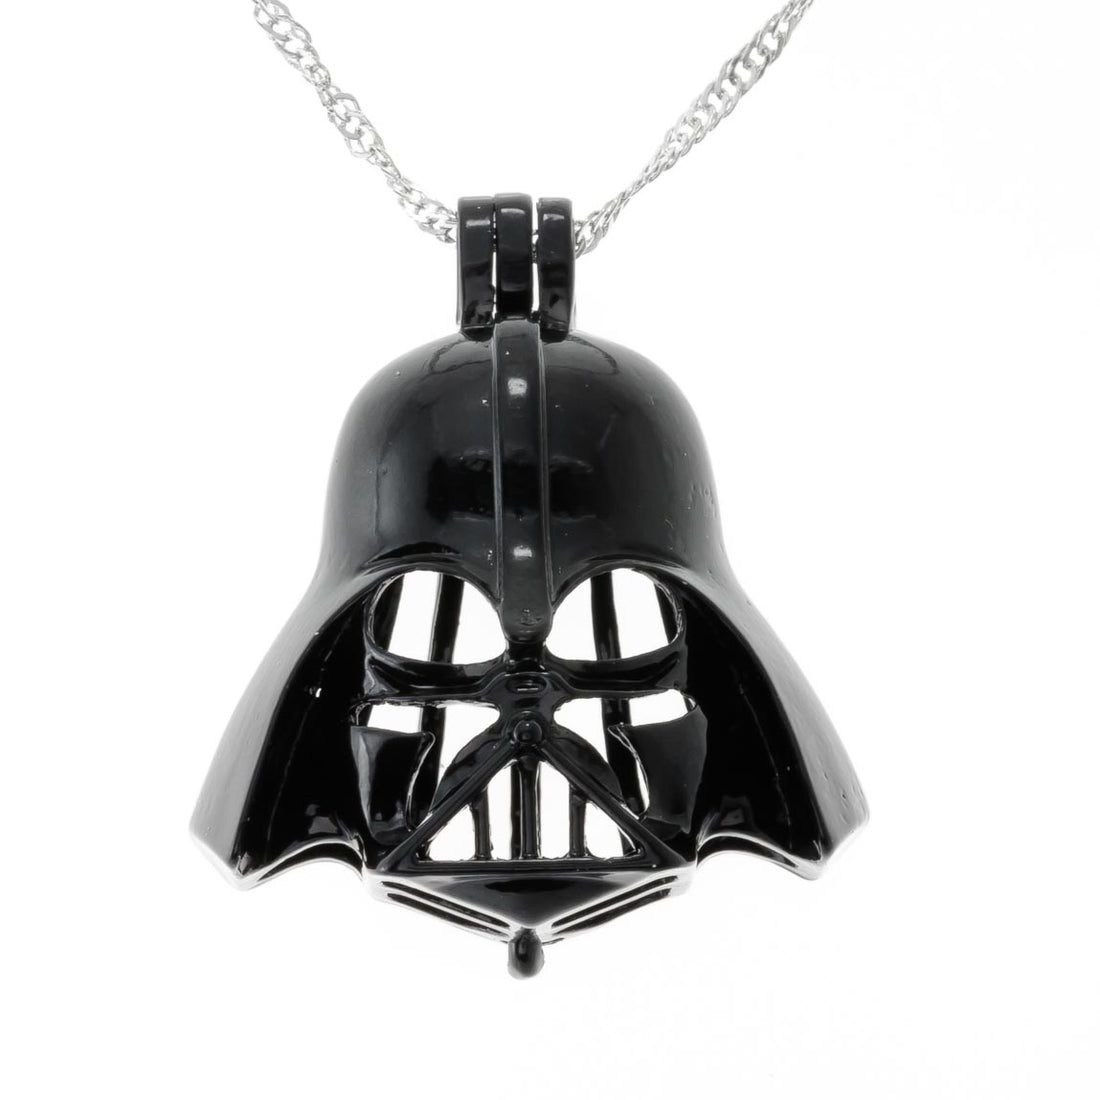 Cage Pendant Black Plated - Darth Vader